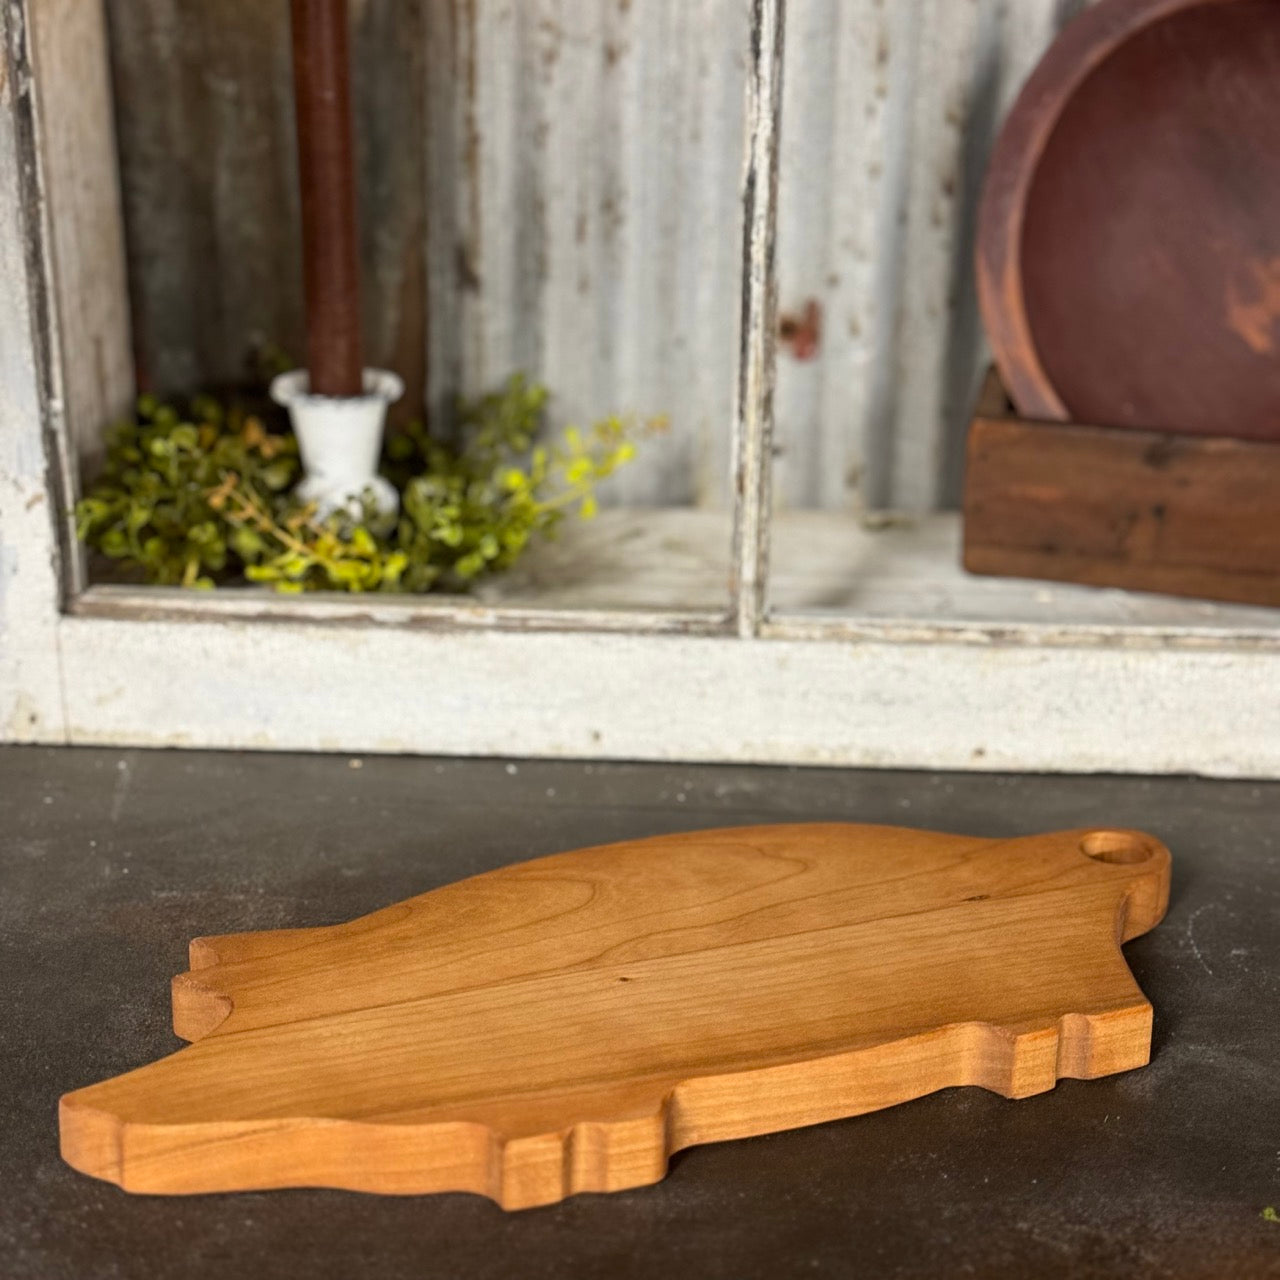 Pig Shaped Cheese Board - Cherry